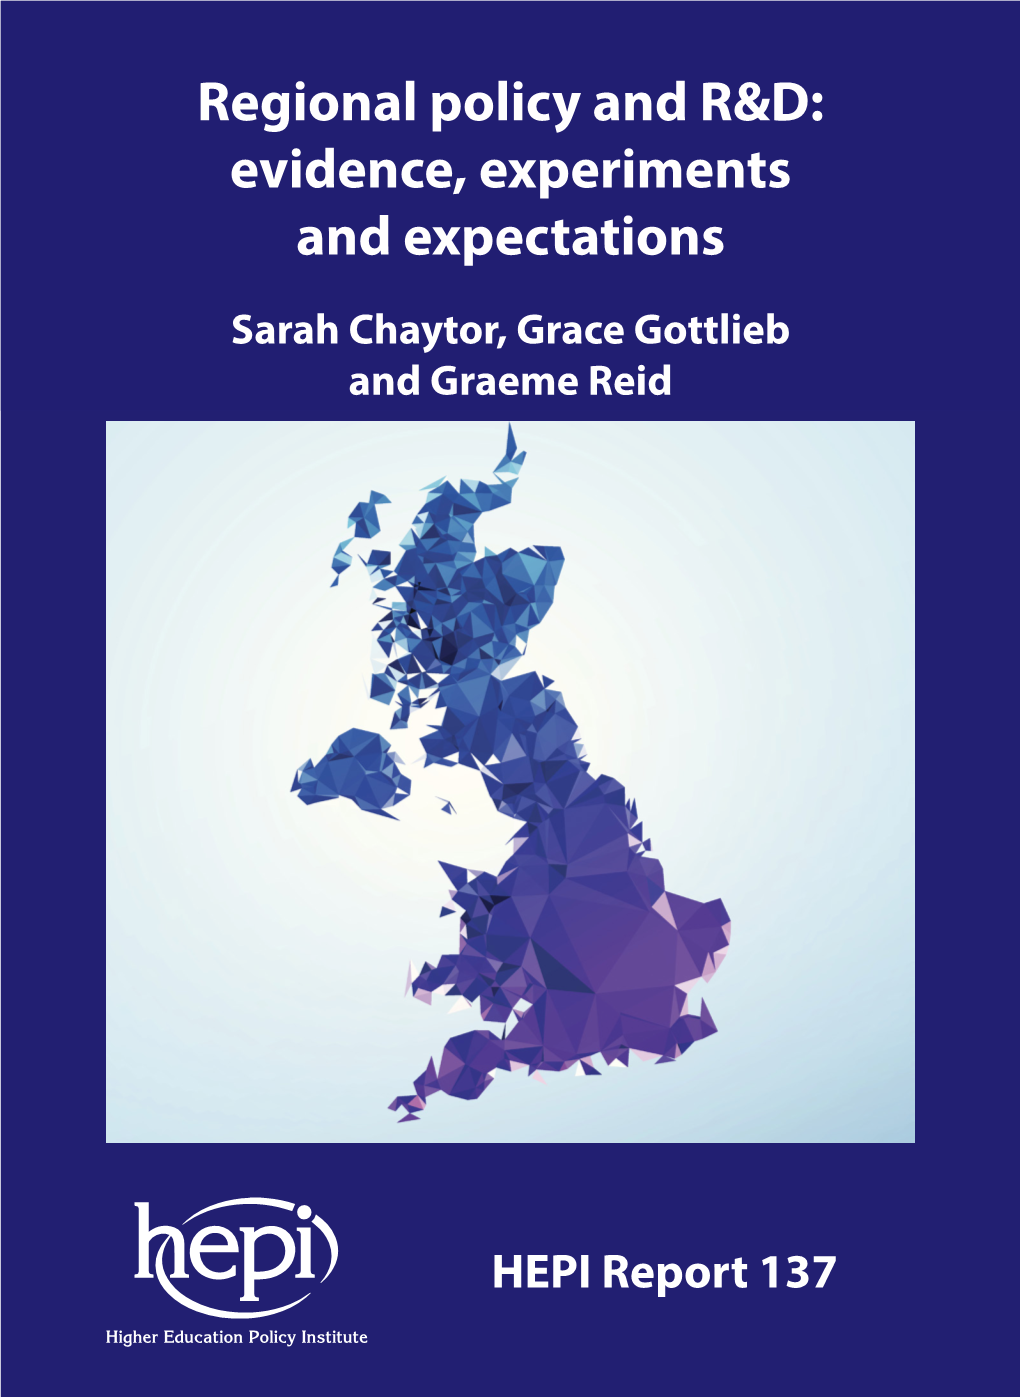 Regional Policy and R&D: Evidence, Experiments and Expectations